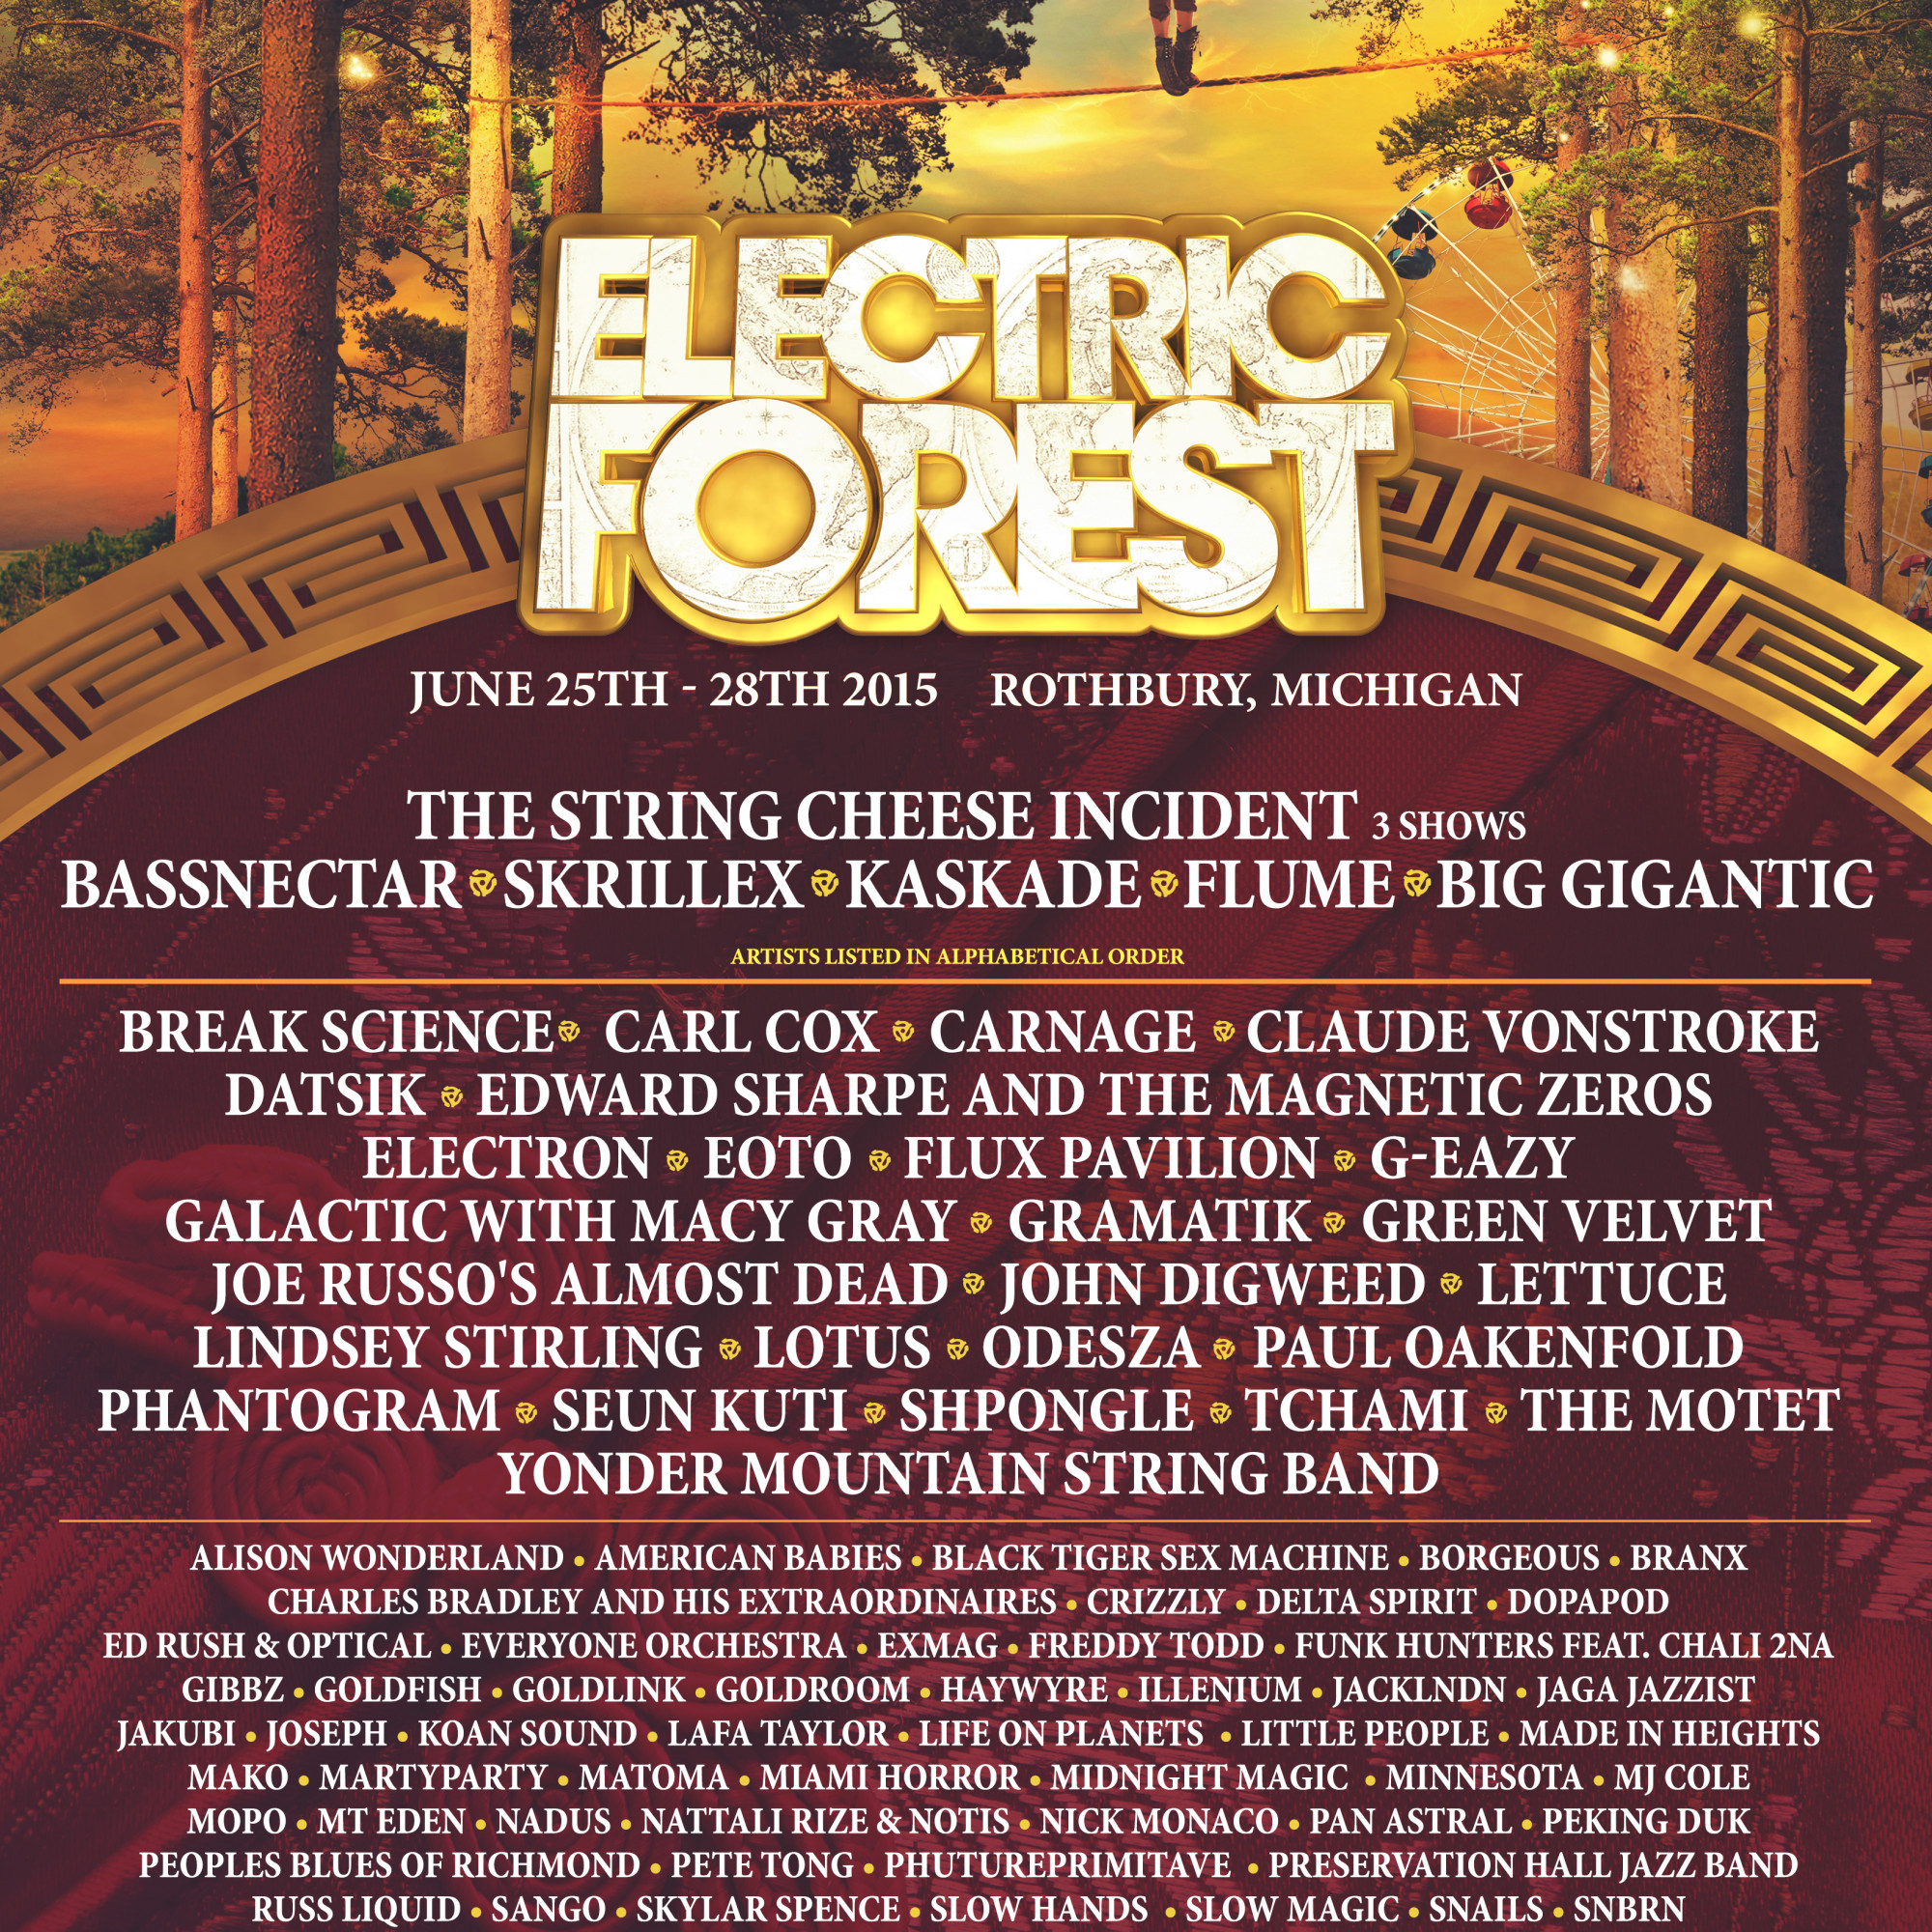 ElectricForest2015_Lineup_11x17-11-2000x2000